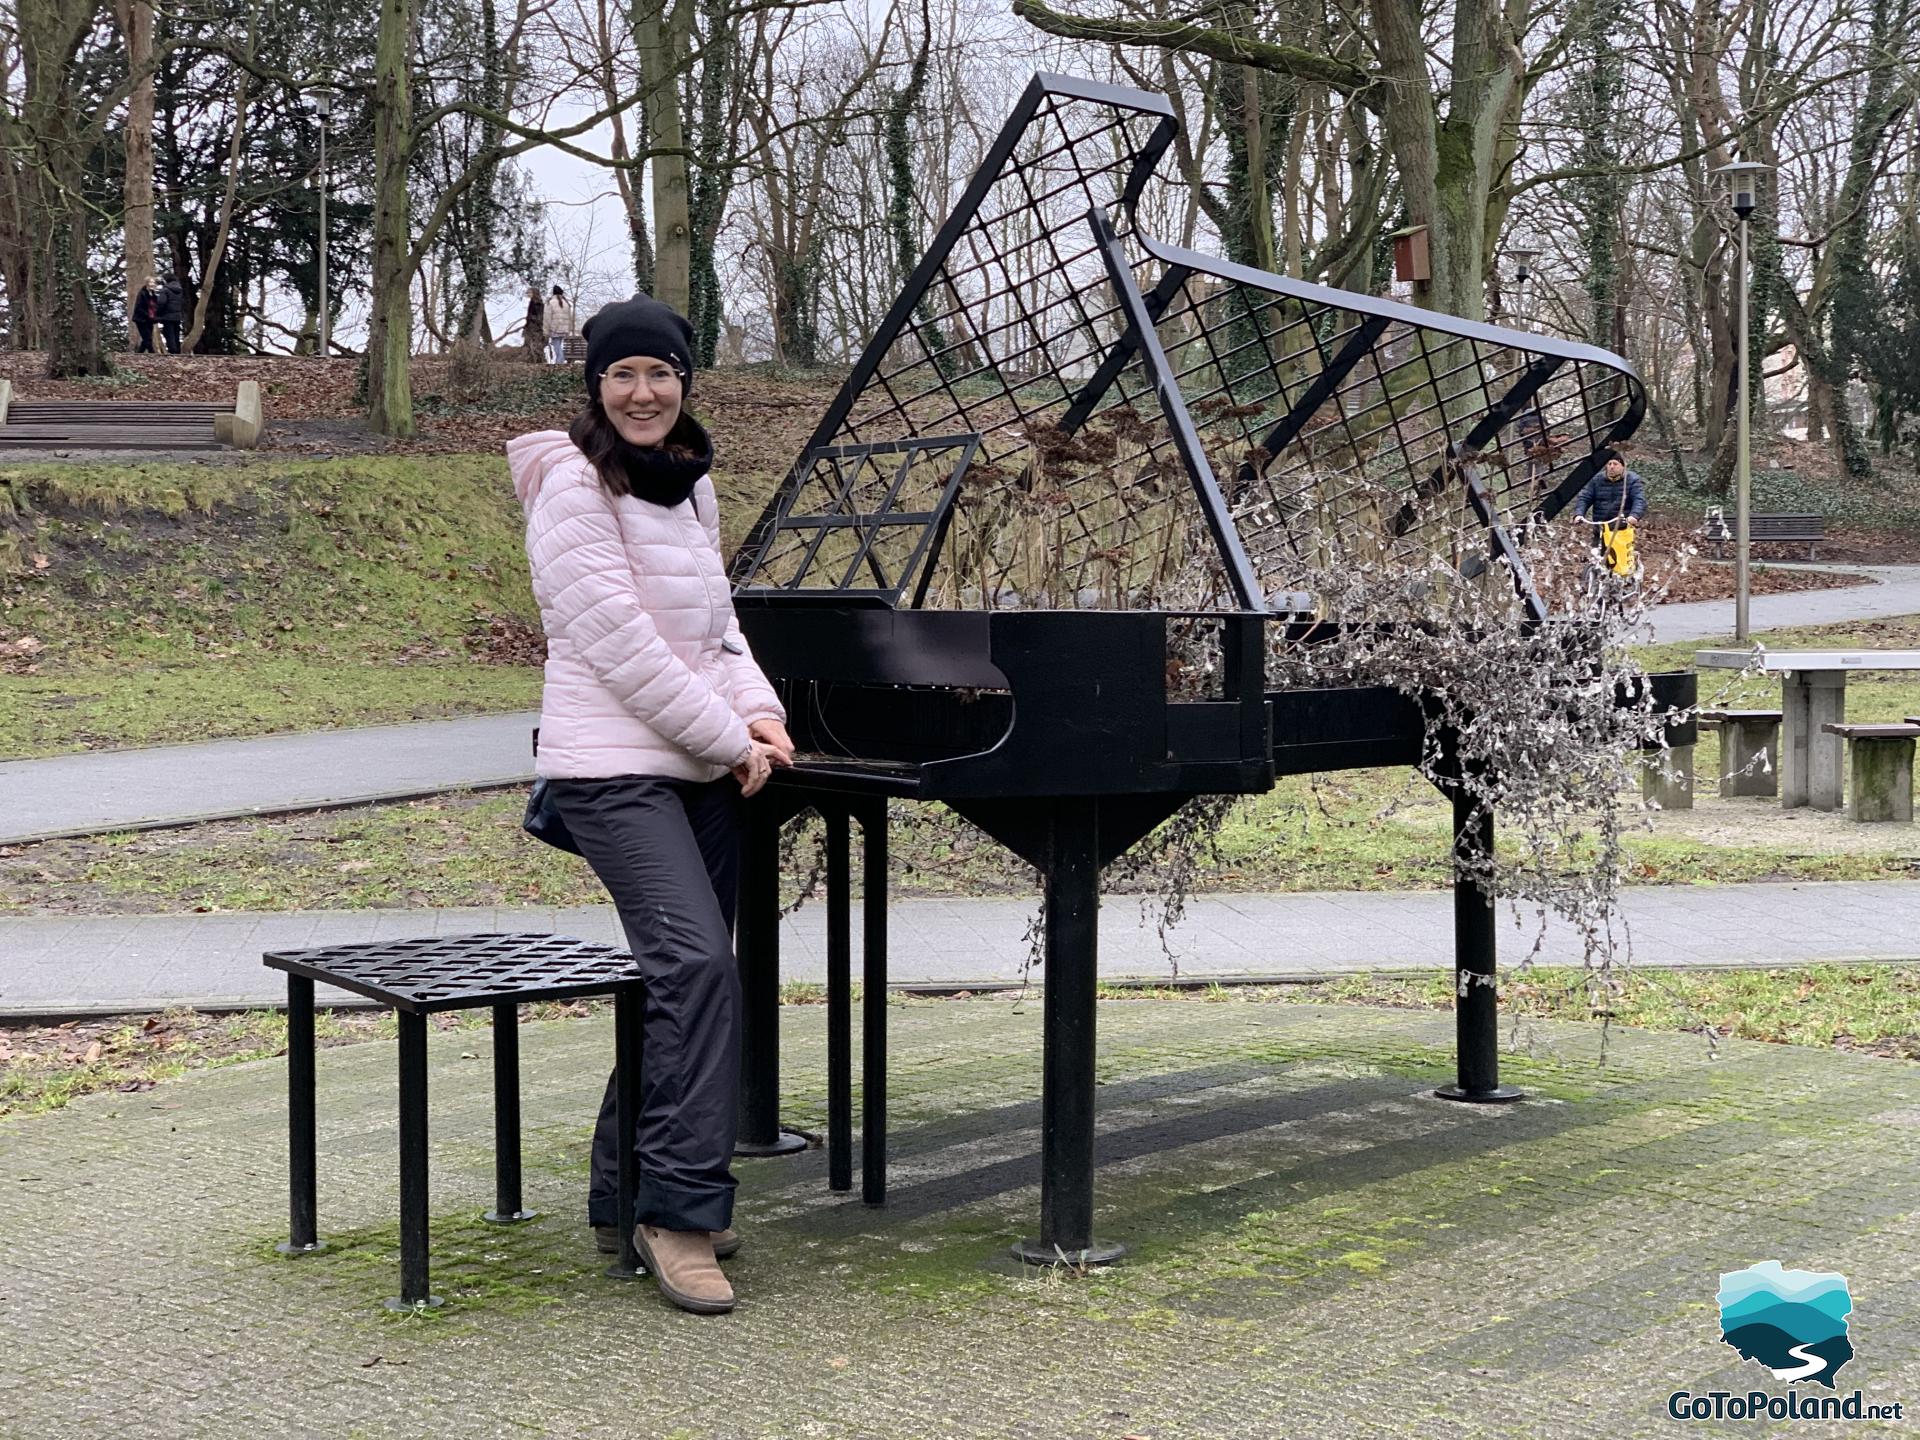 sculpture of a metal piano in the park, a woman is standing by it